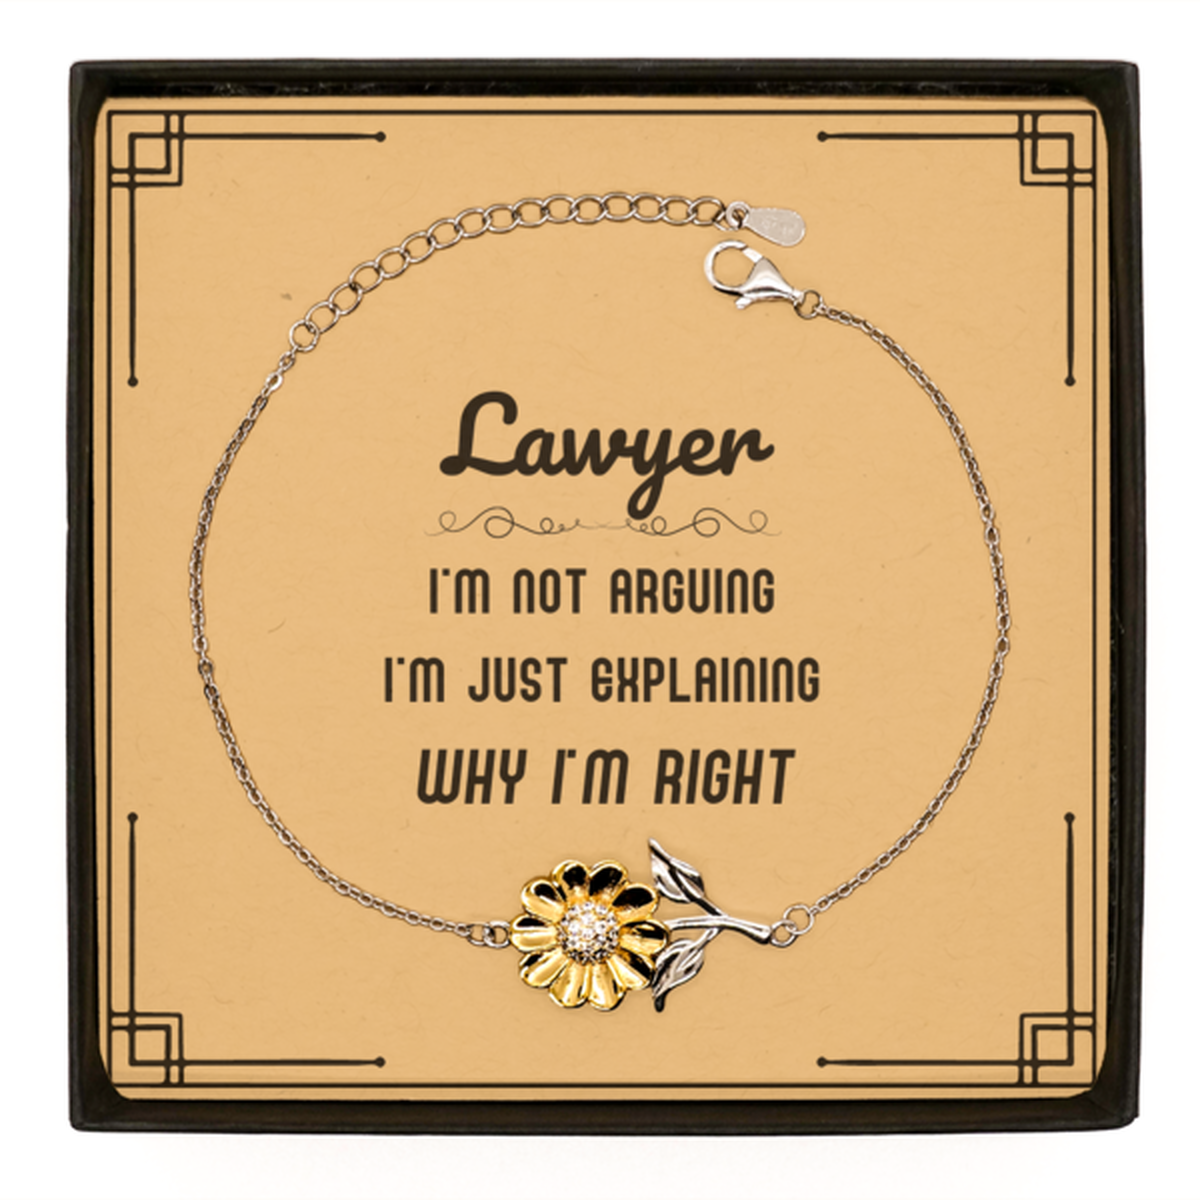 Lawyer I'm not Arguing. I'm Just Explaining Why I'm RIGHT Sunflower Bracelet, Funny Saying Quote Lawyer Gifts For Lawyer Message Card Graduation Birthday Christmas Gifts for Men Women Coworker